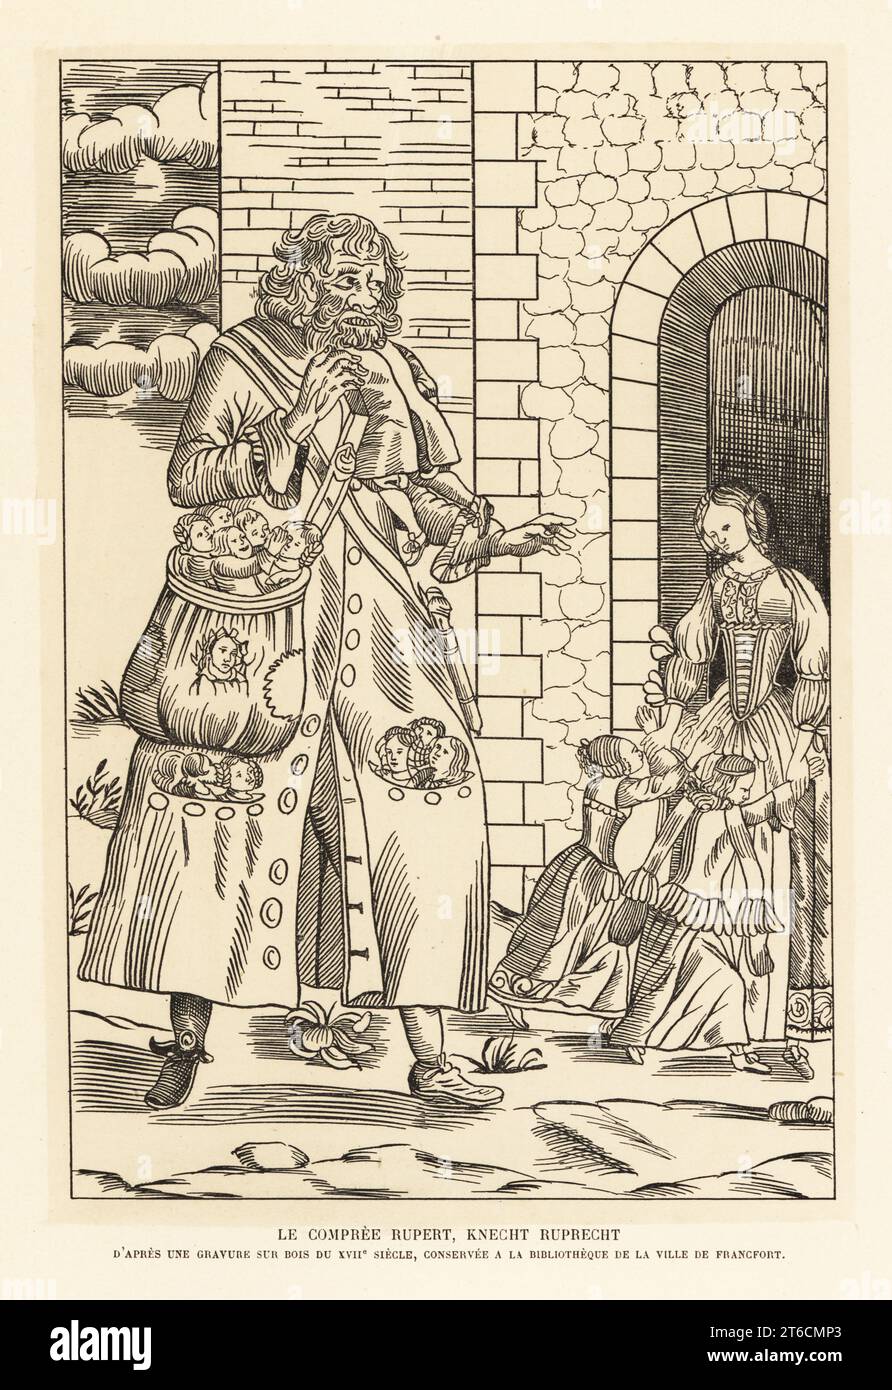 Knecht Ruprecht, or Hans Ruprecht, manservant to Saint Nicholas in German folklore and figure in a Nuremberg Christmas procession. The pockets of his long coat are filled with children. He appears in Le Compree Rupert, Knecht Ruprecht. Apres une gravure sur bois du XVIIe siecle. Lithograph after a 17th-century woodcut from Henry Rene dAllemagnes Recreations et Passe-Temps, Games and Pastimes, Hachette, Paris, 1906. Stock Photo